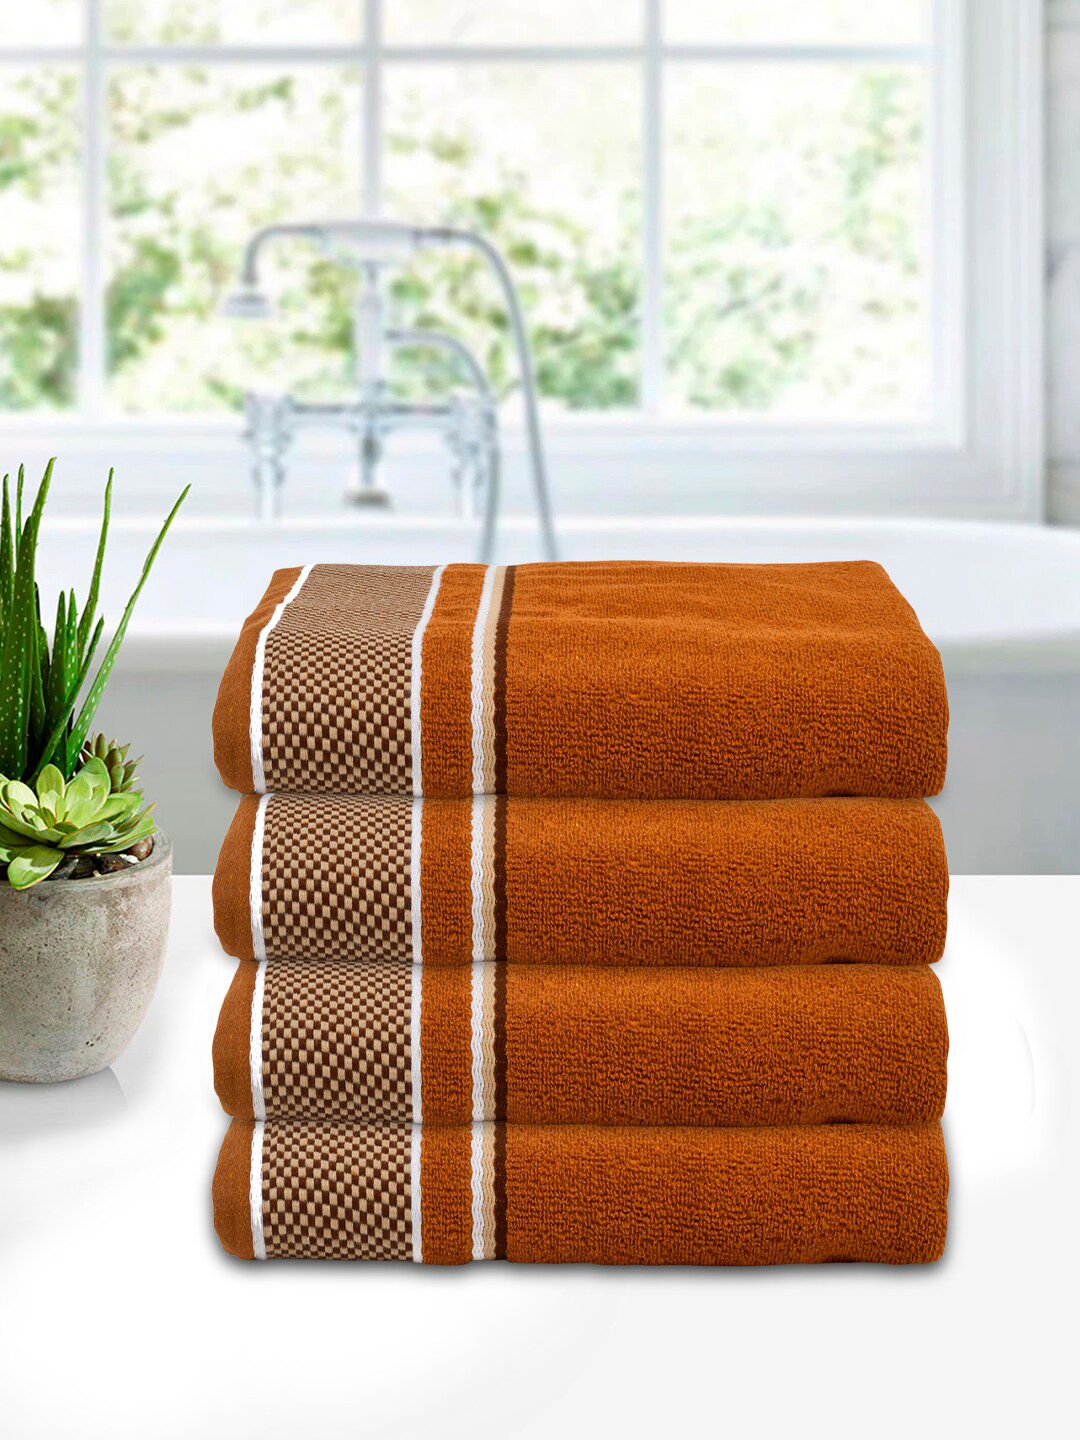 Kuber Industries Set of 4 Brown Cotton Bath Towels Price in India